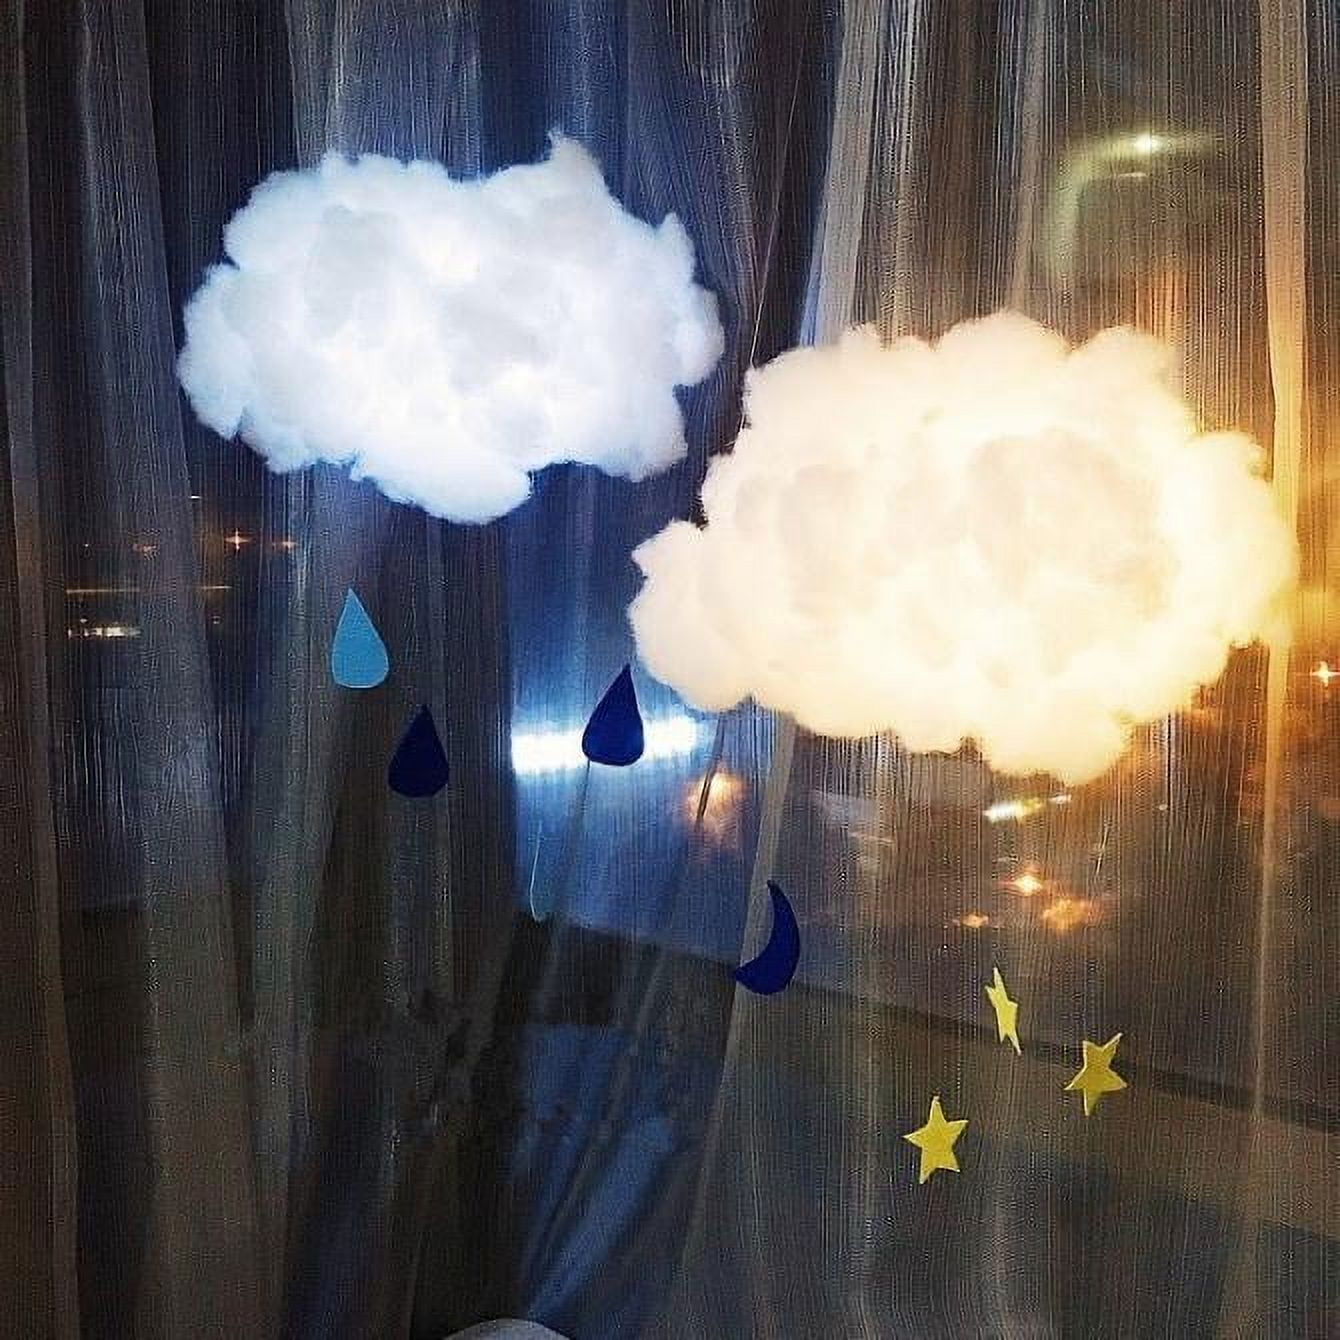 Cotton Simulation Cloud Decorations 3D Artificial Fake Clouds Props, Clouds  for Ceiling, Room DIY Cloud Decor Art Stage Wedding Party for Stage Show